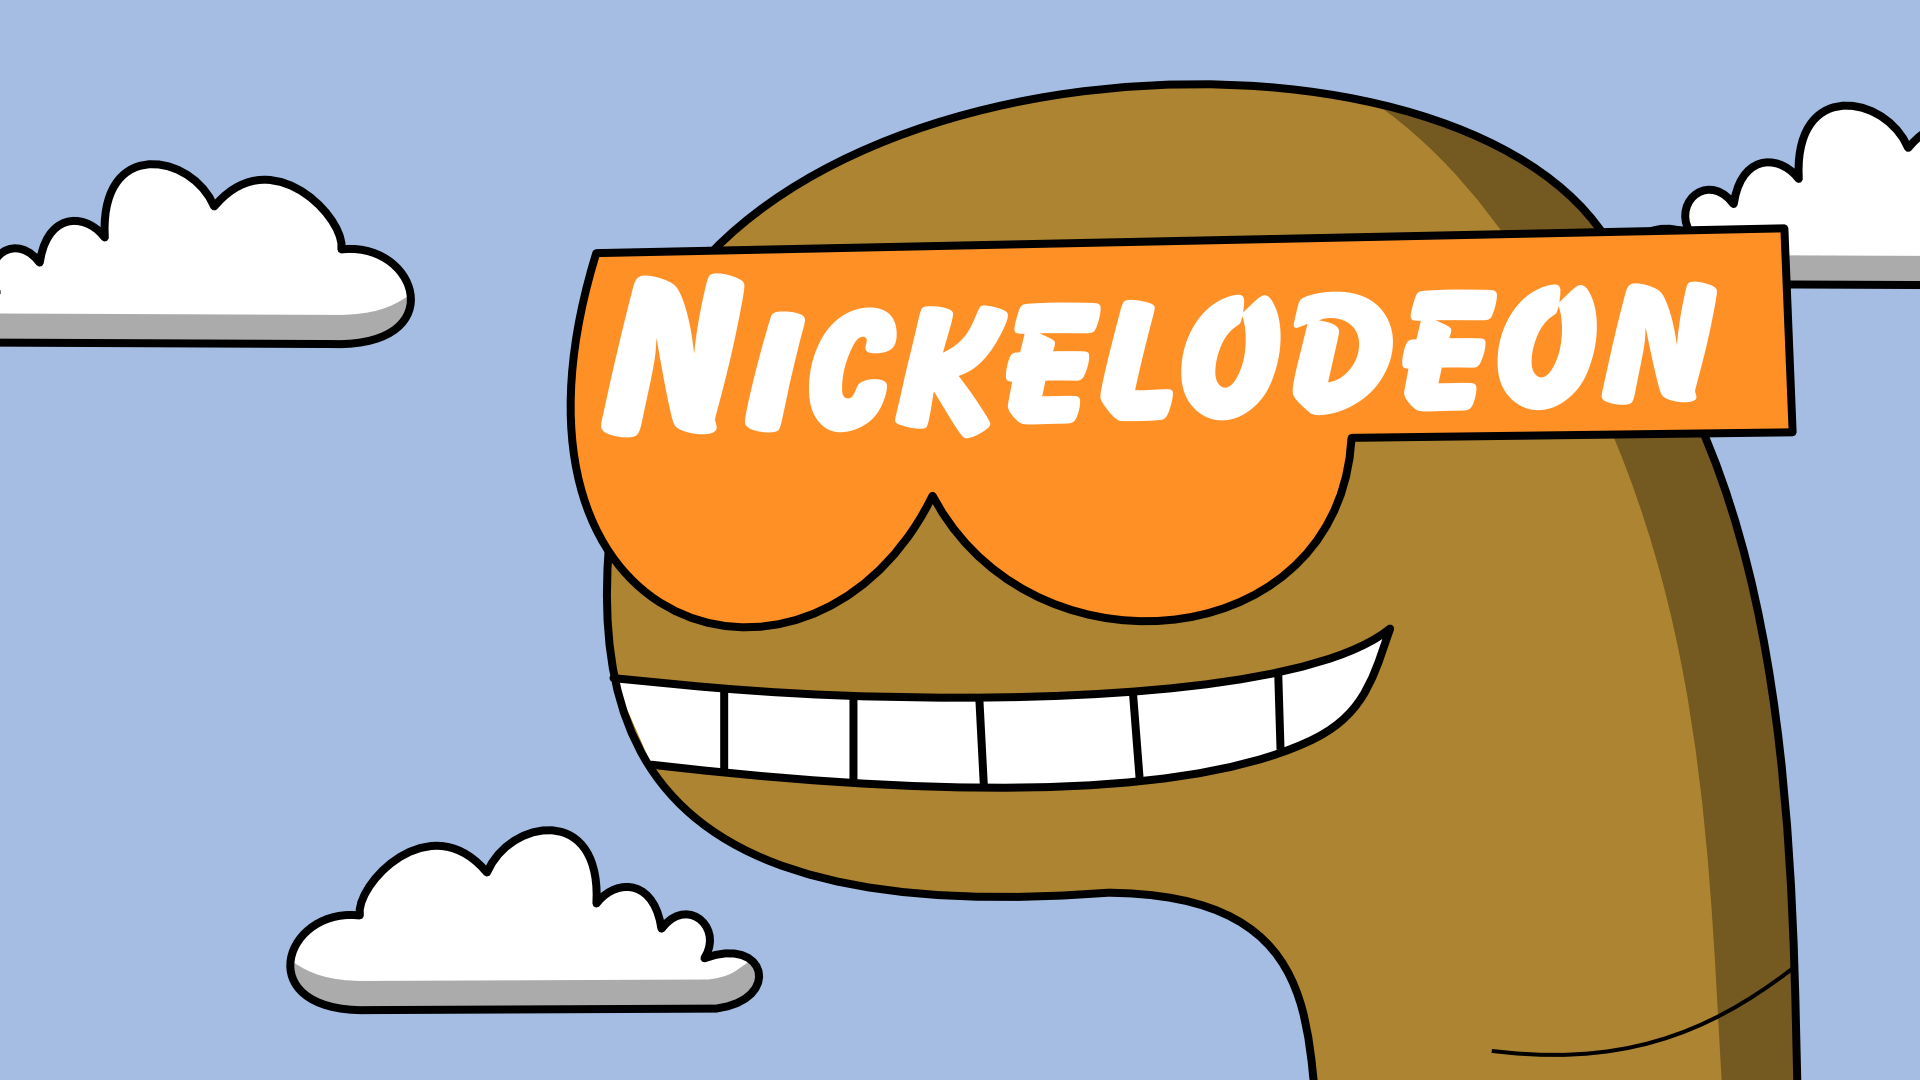 Nickelodeon Wallpaper FREE Picture